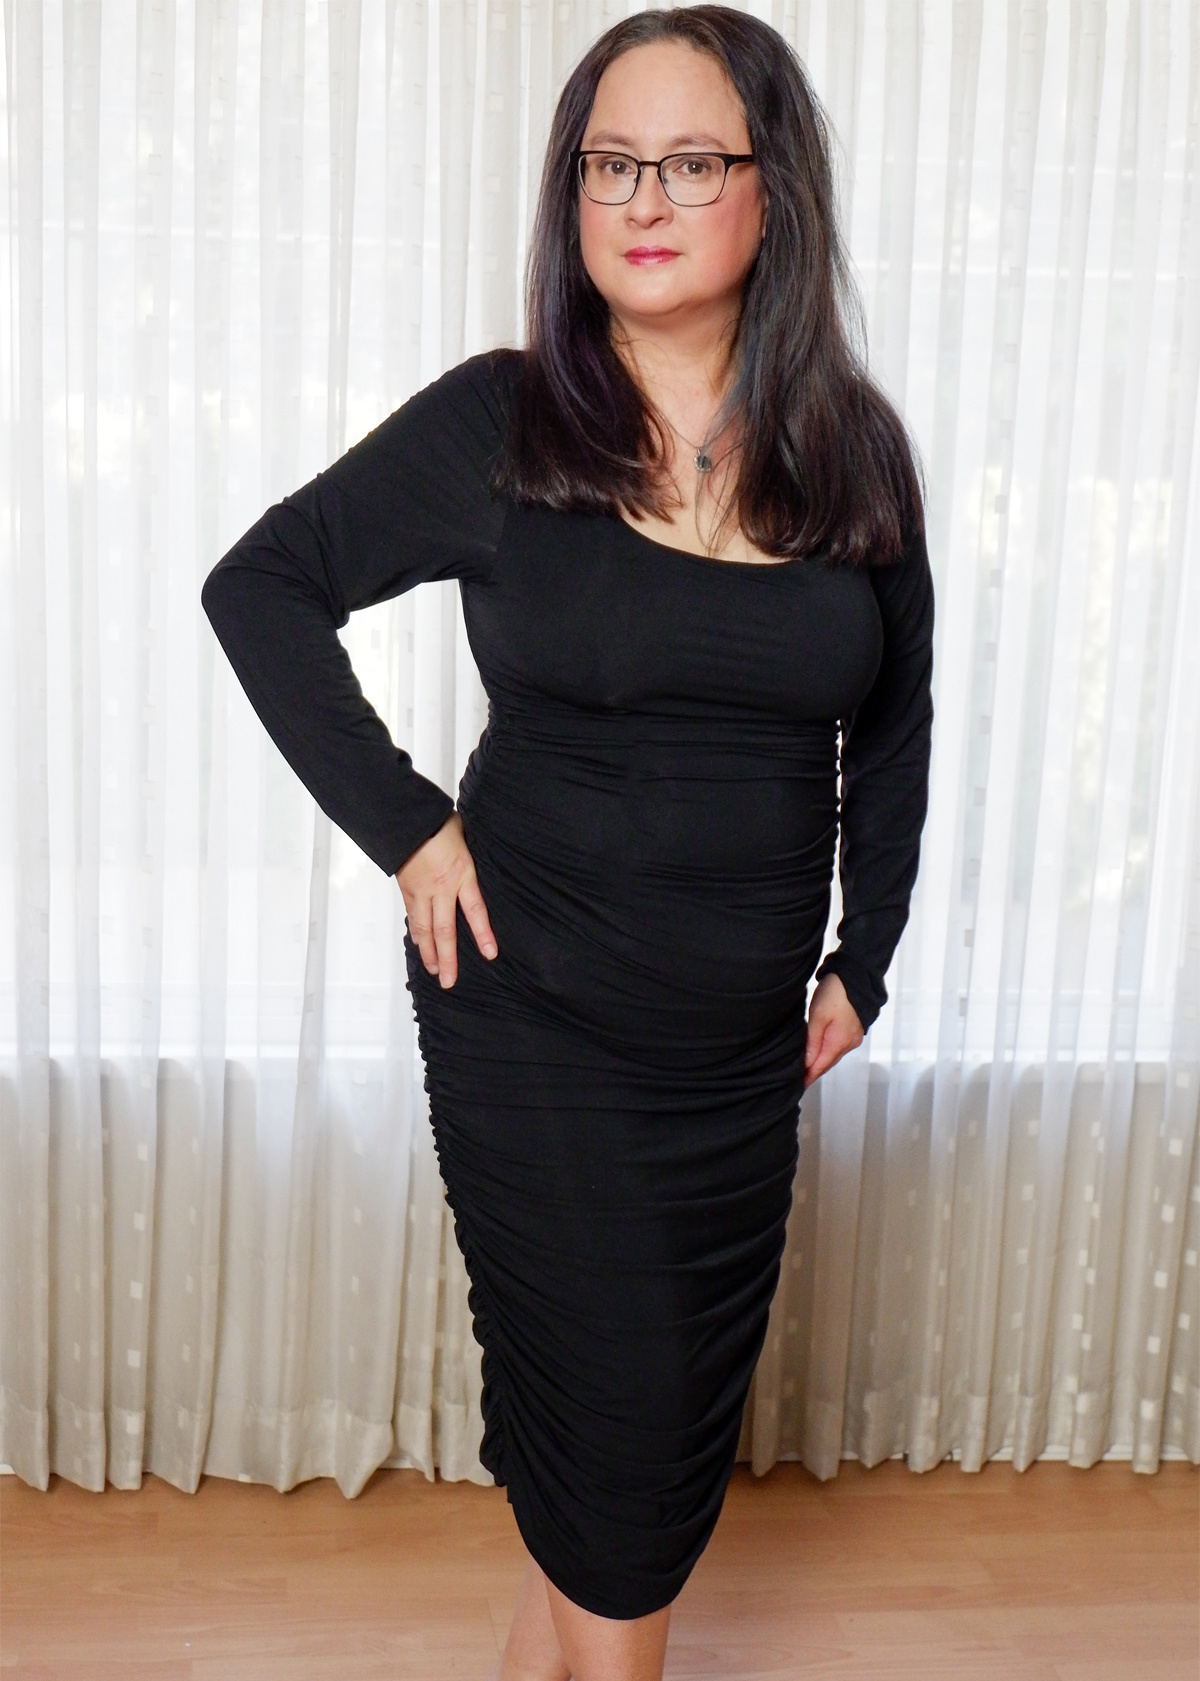 powered by Mom wearing black framed glasses, black ruched shaping dress. Right hand on hip, left arm straight down.